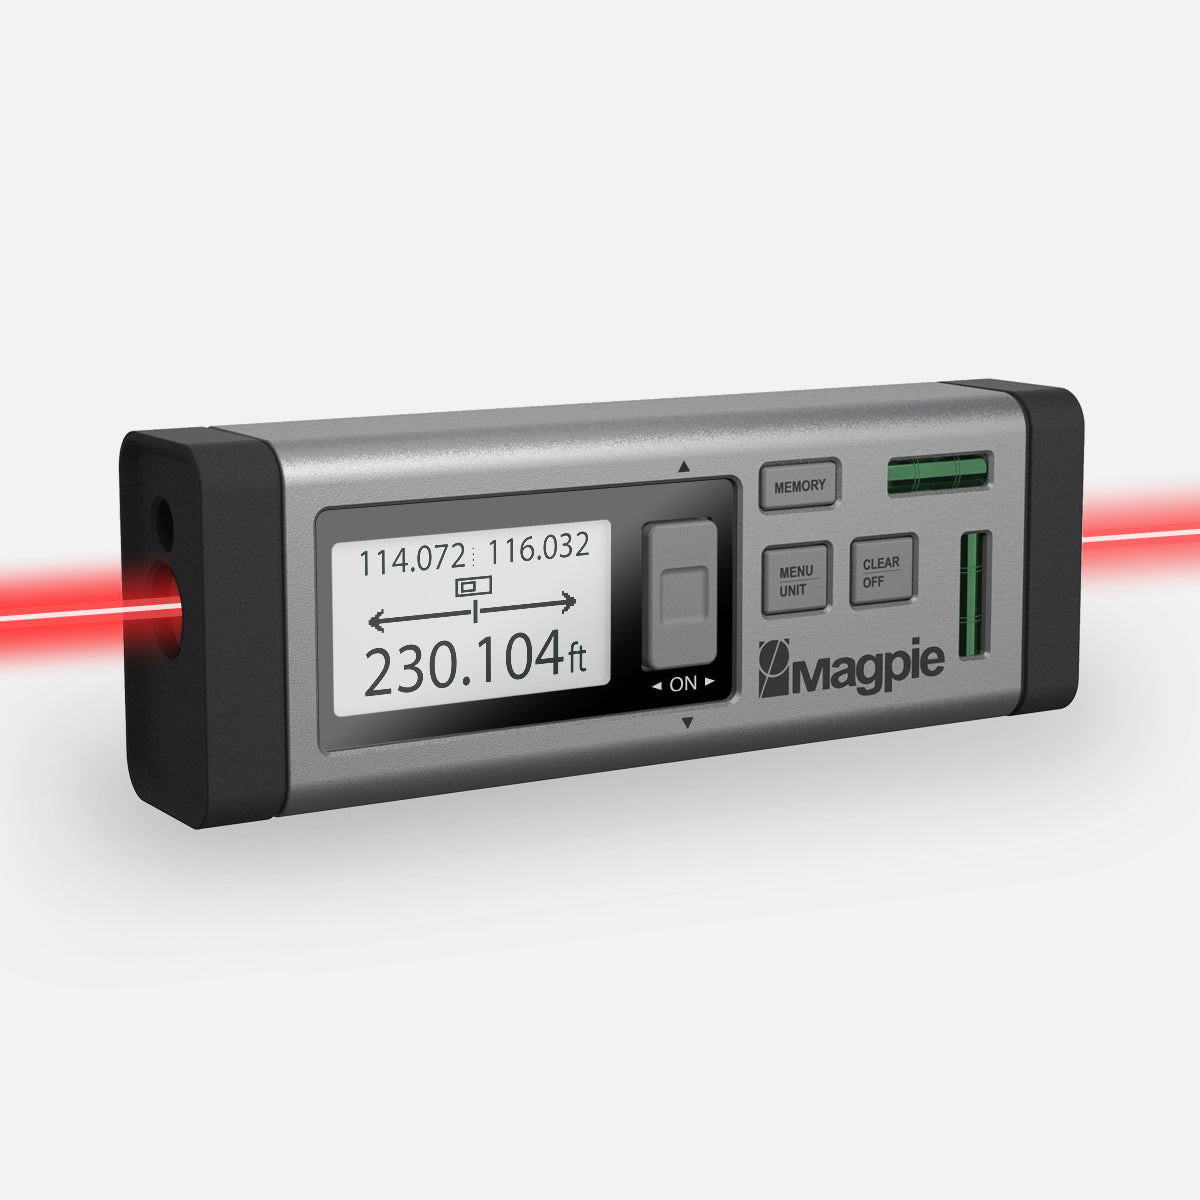 VH-80 : The World's First Bilateral Laser Measuring Tool